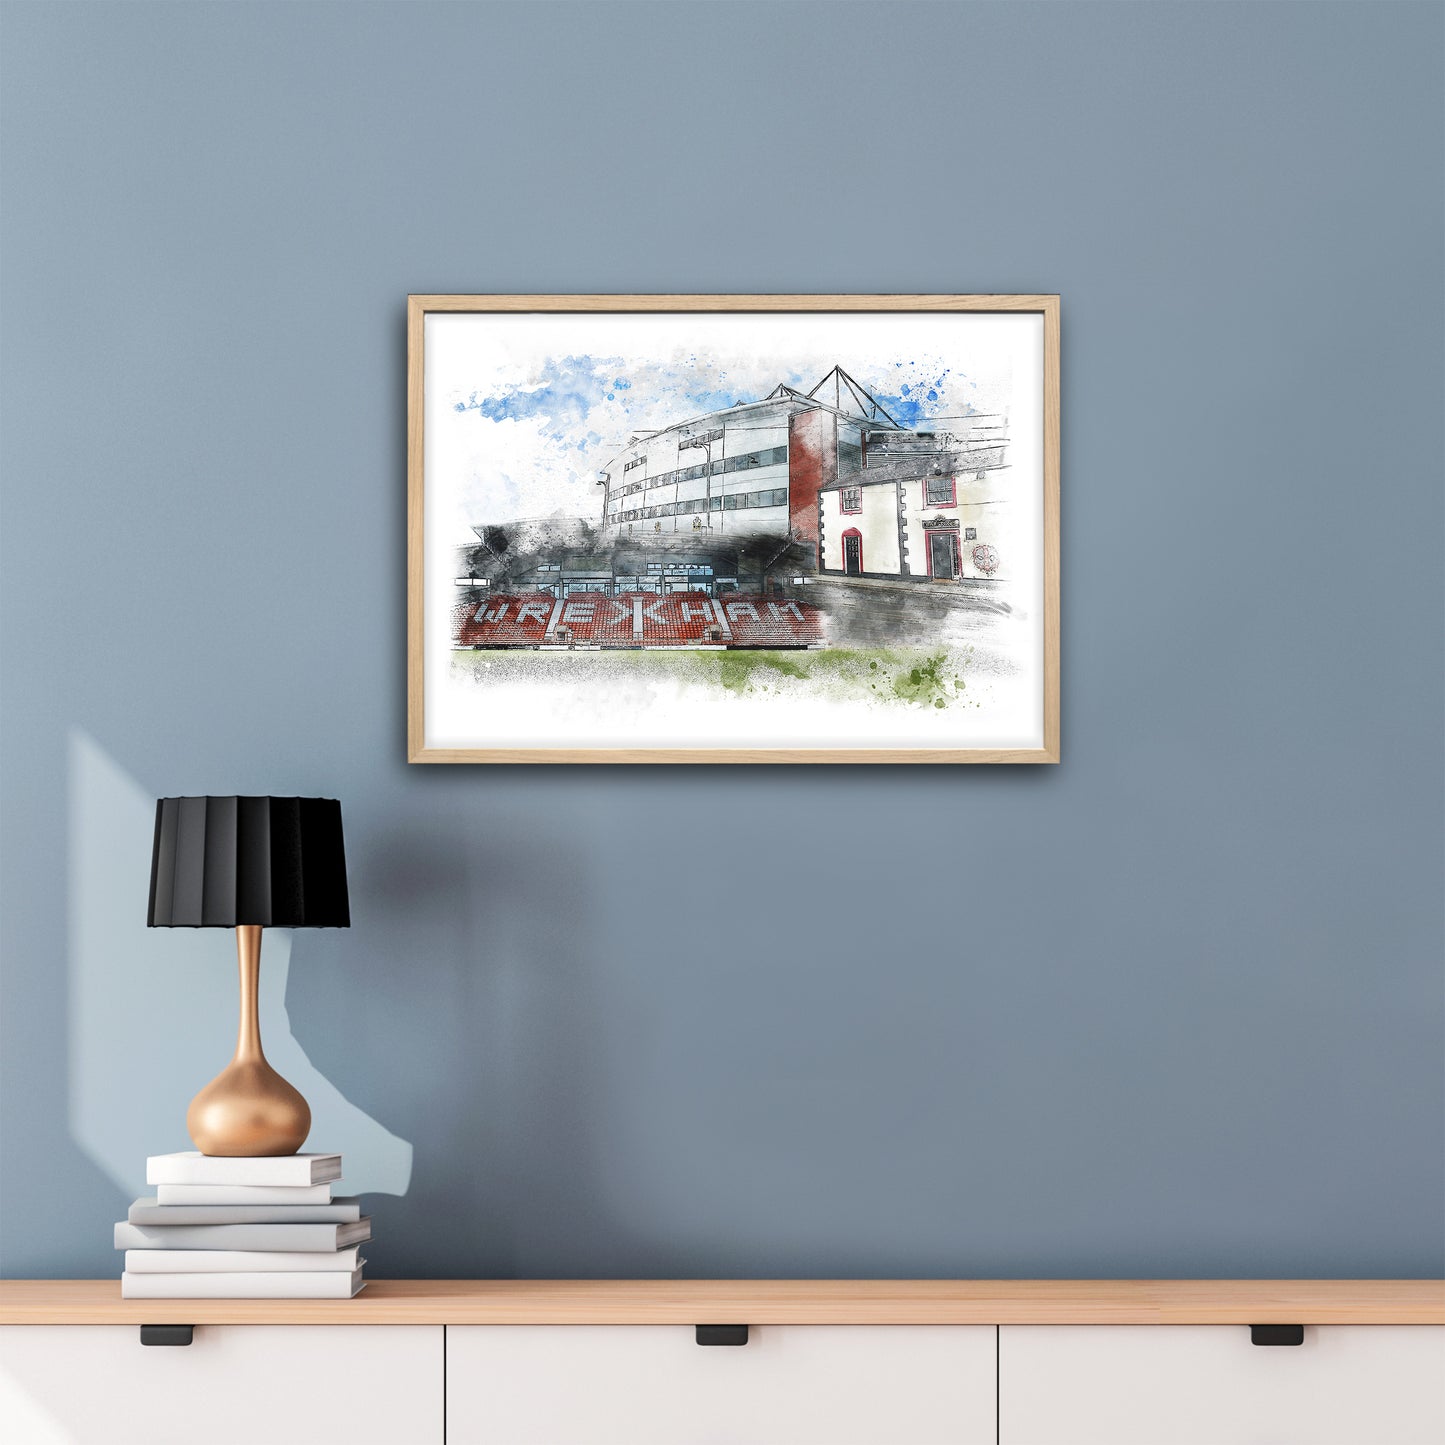 Wrexham AFC The Racecourse Ground Framed Poster |  Wrexham AFC Art | Illustrated Prints | The Turf Pub